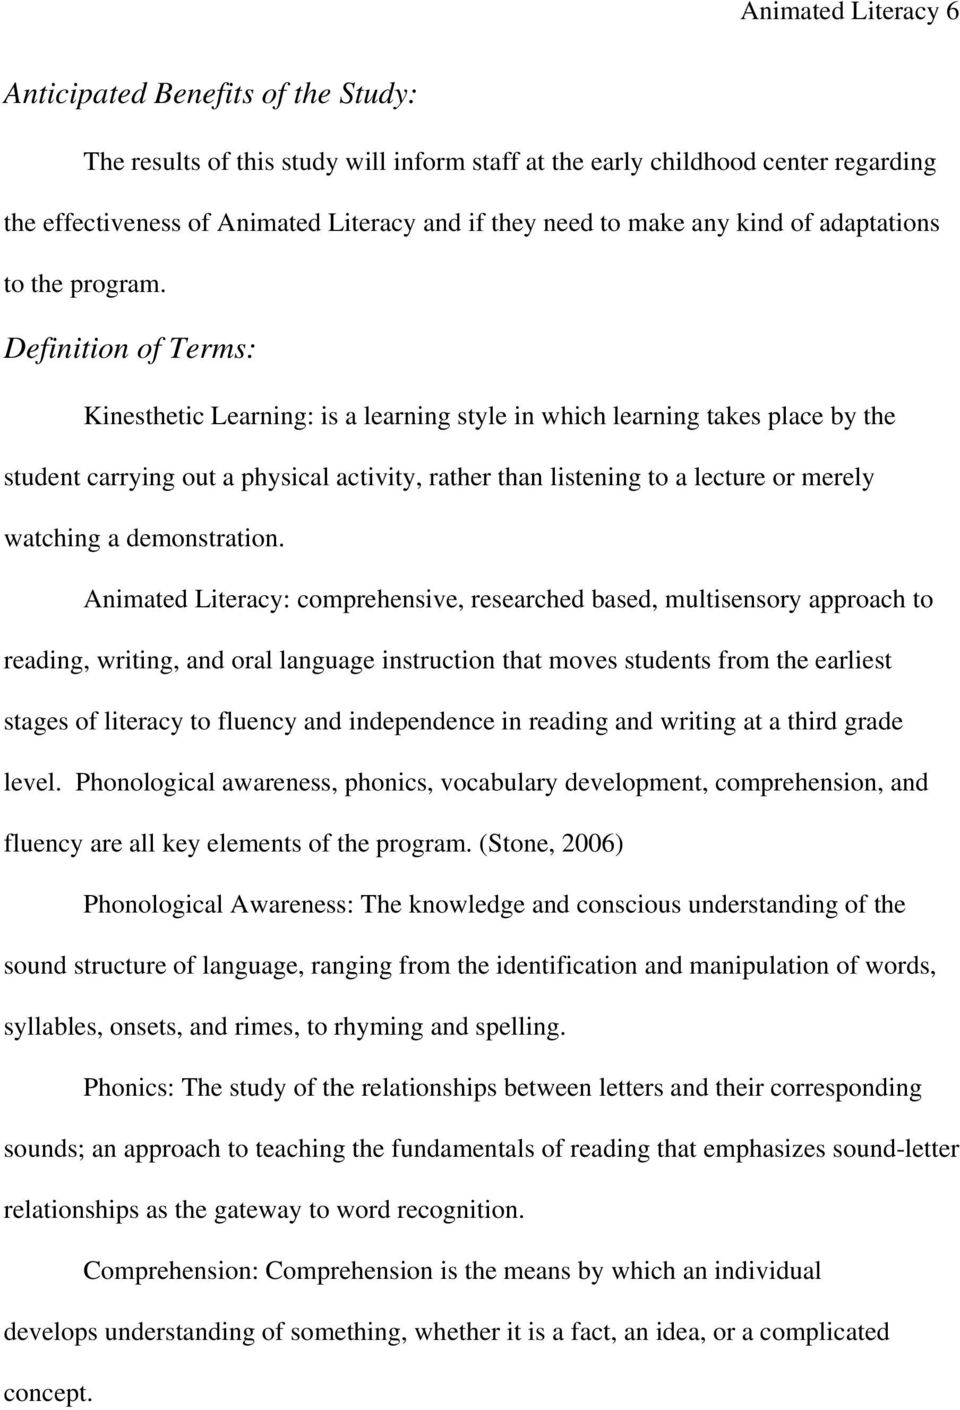 Definition of Terms: Kinesthetic Learning: is a learning style in which learning takes place by the student carrying out a physical activity, rather than listening to a lecture or merely watching a